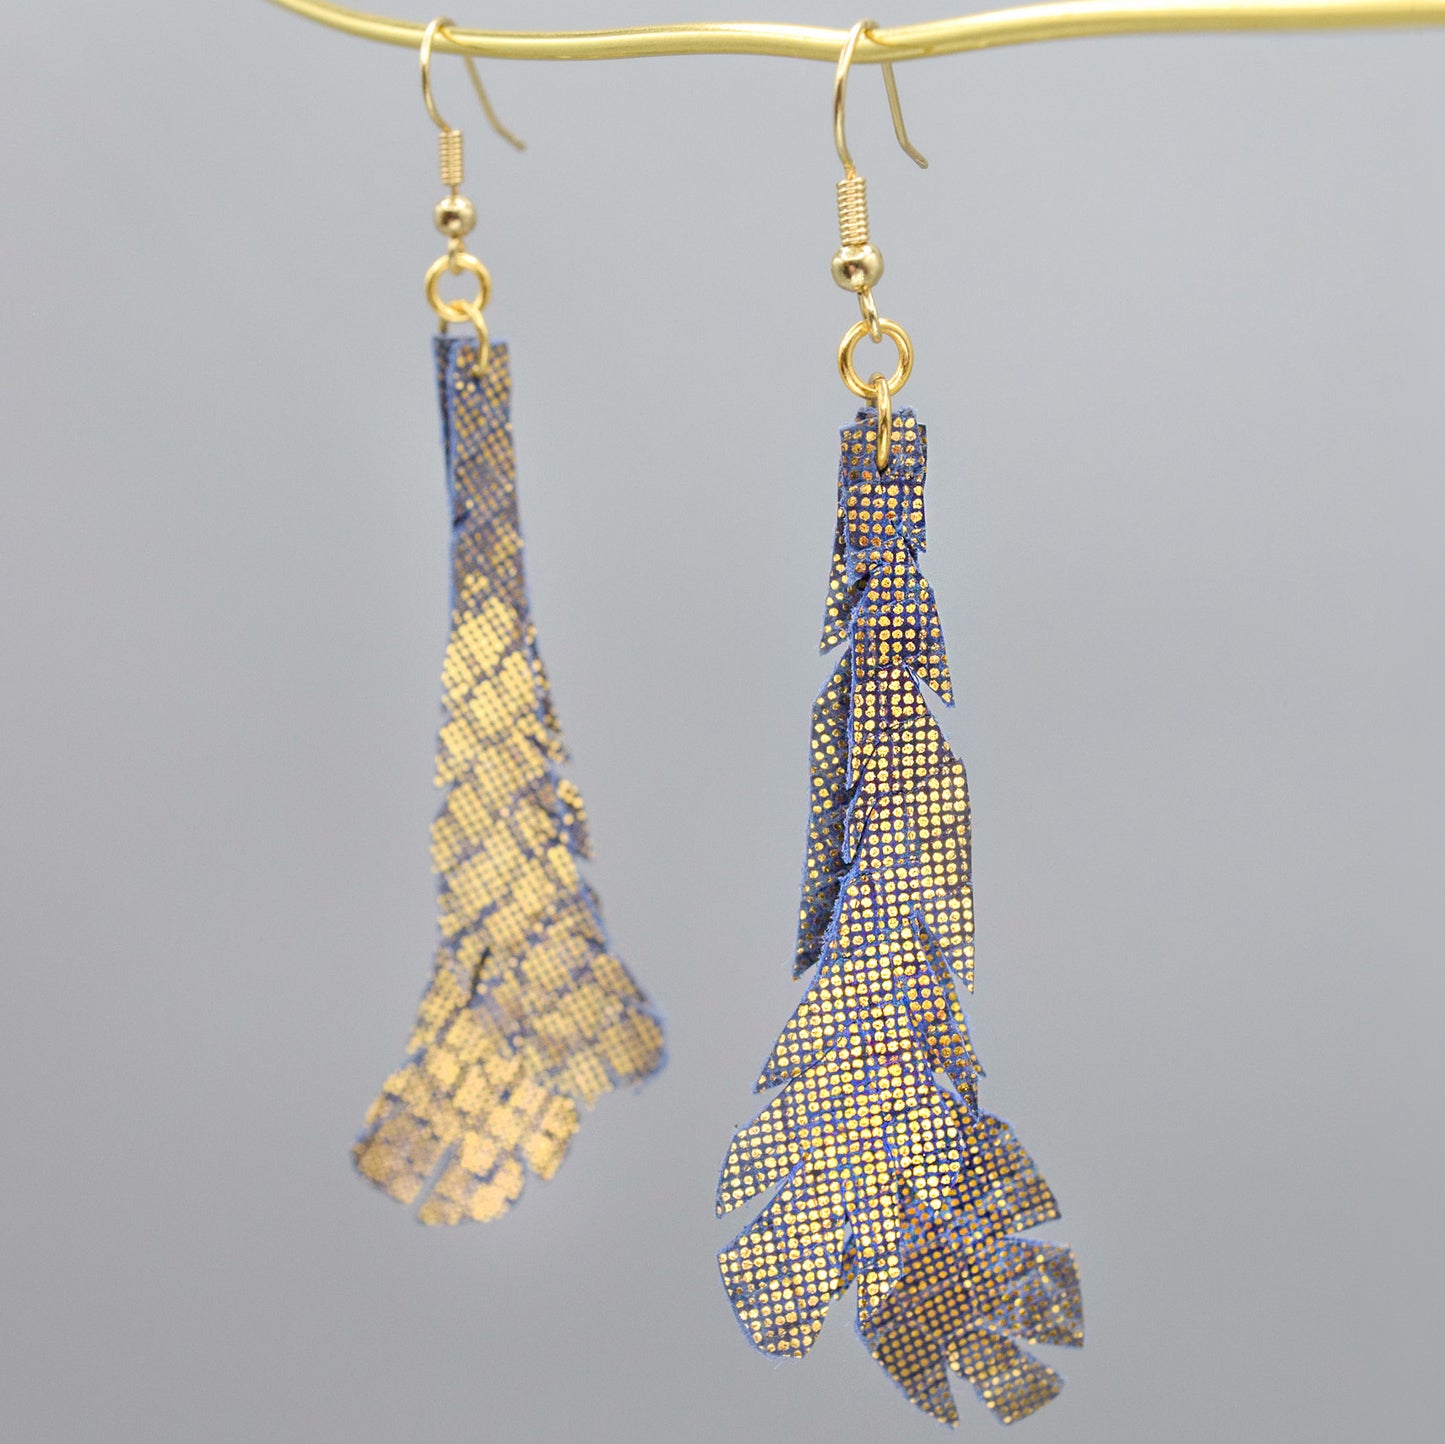 Metallic Feather Leather Earrings- Gold/Blue "Shorties"